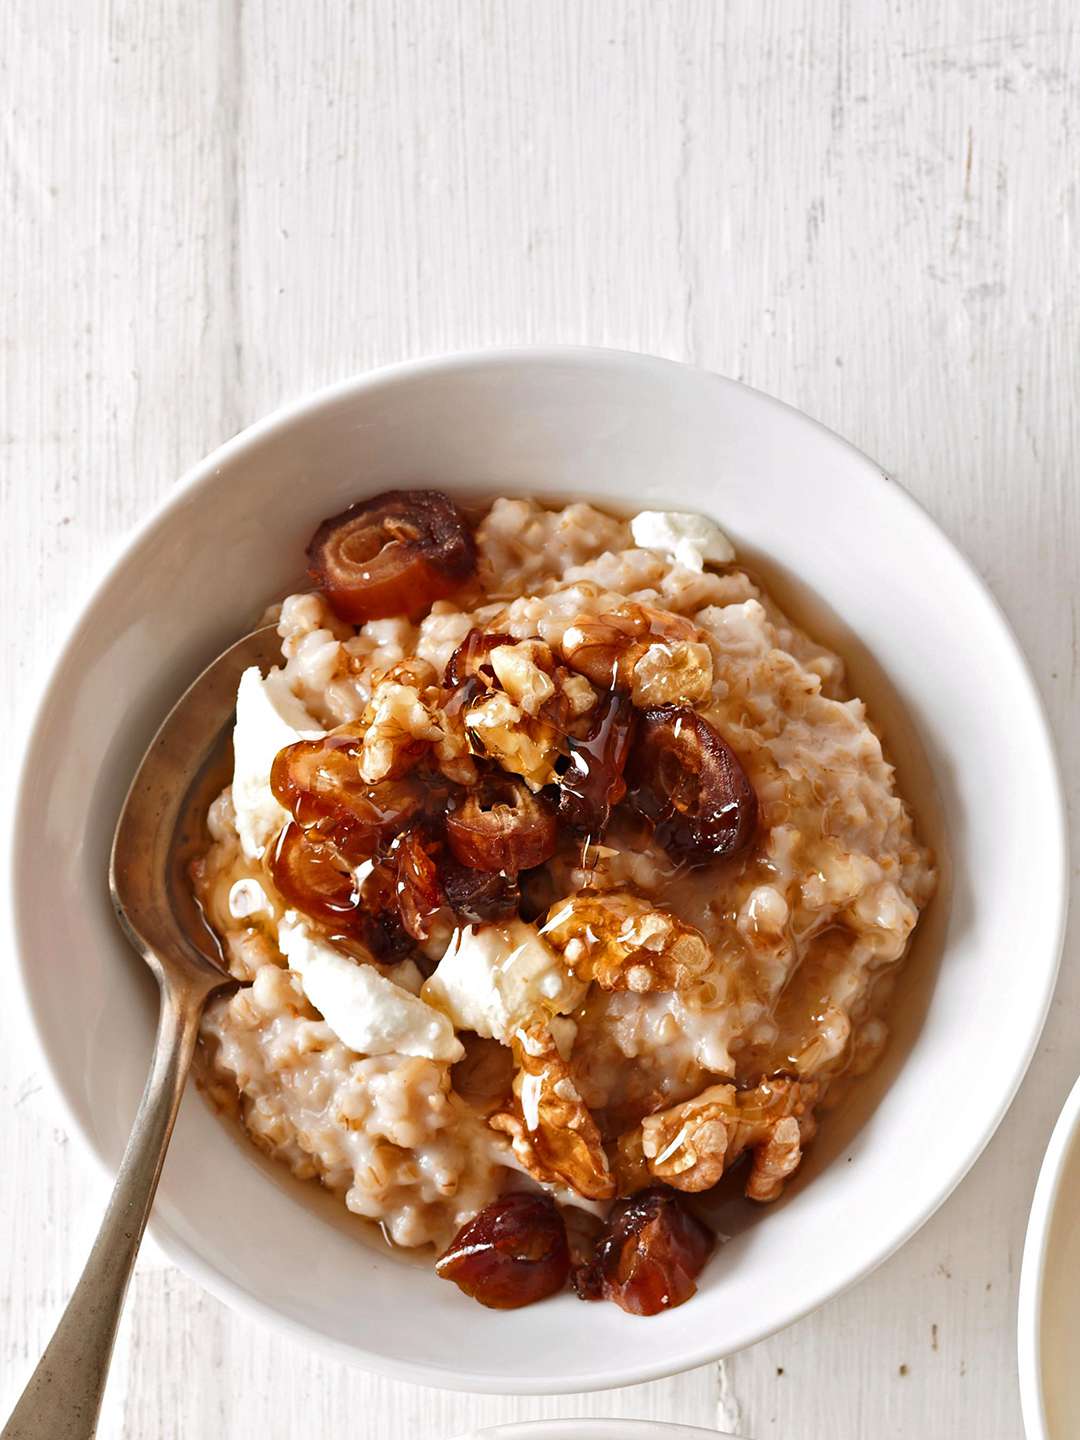 Oatmeal with Goat Cheese, Dates, Walnuts, and Honey